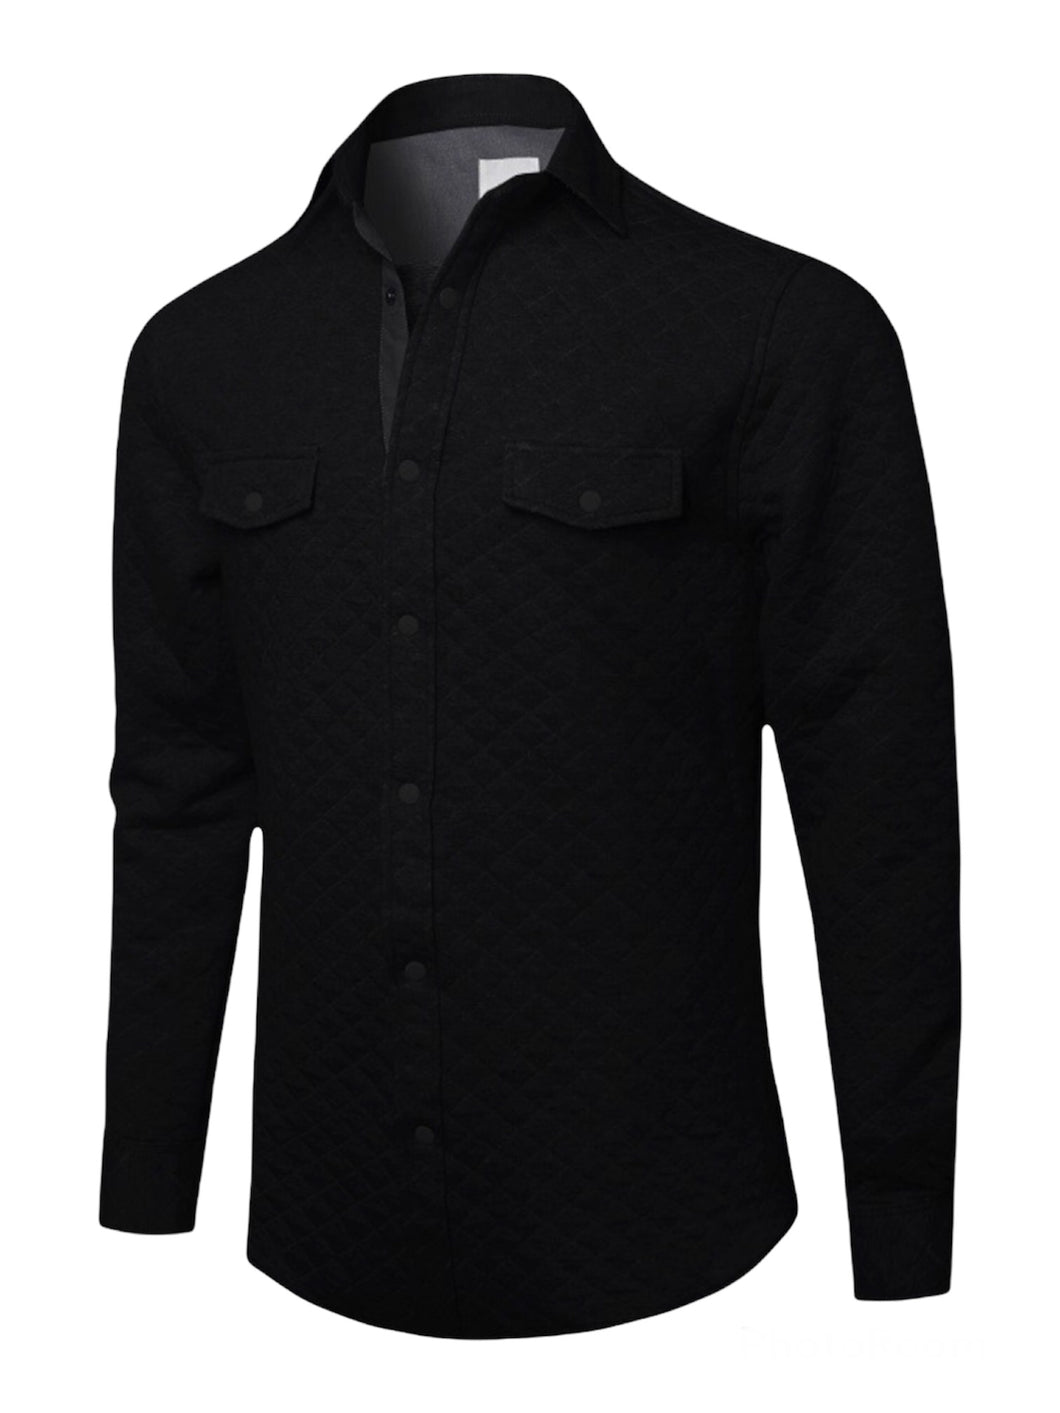 Super Soft Quilted Long Sleeve Snap Button Shirts- Black